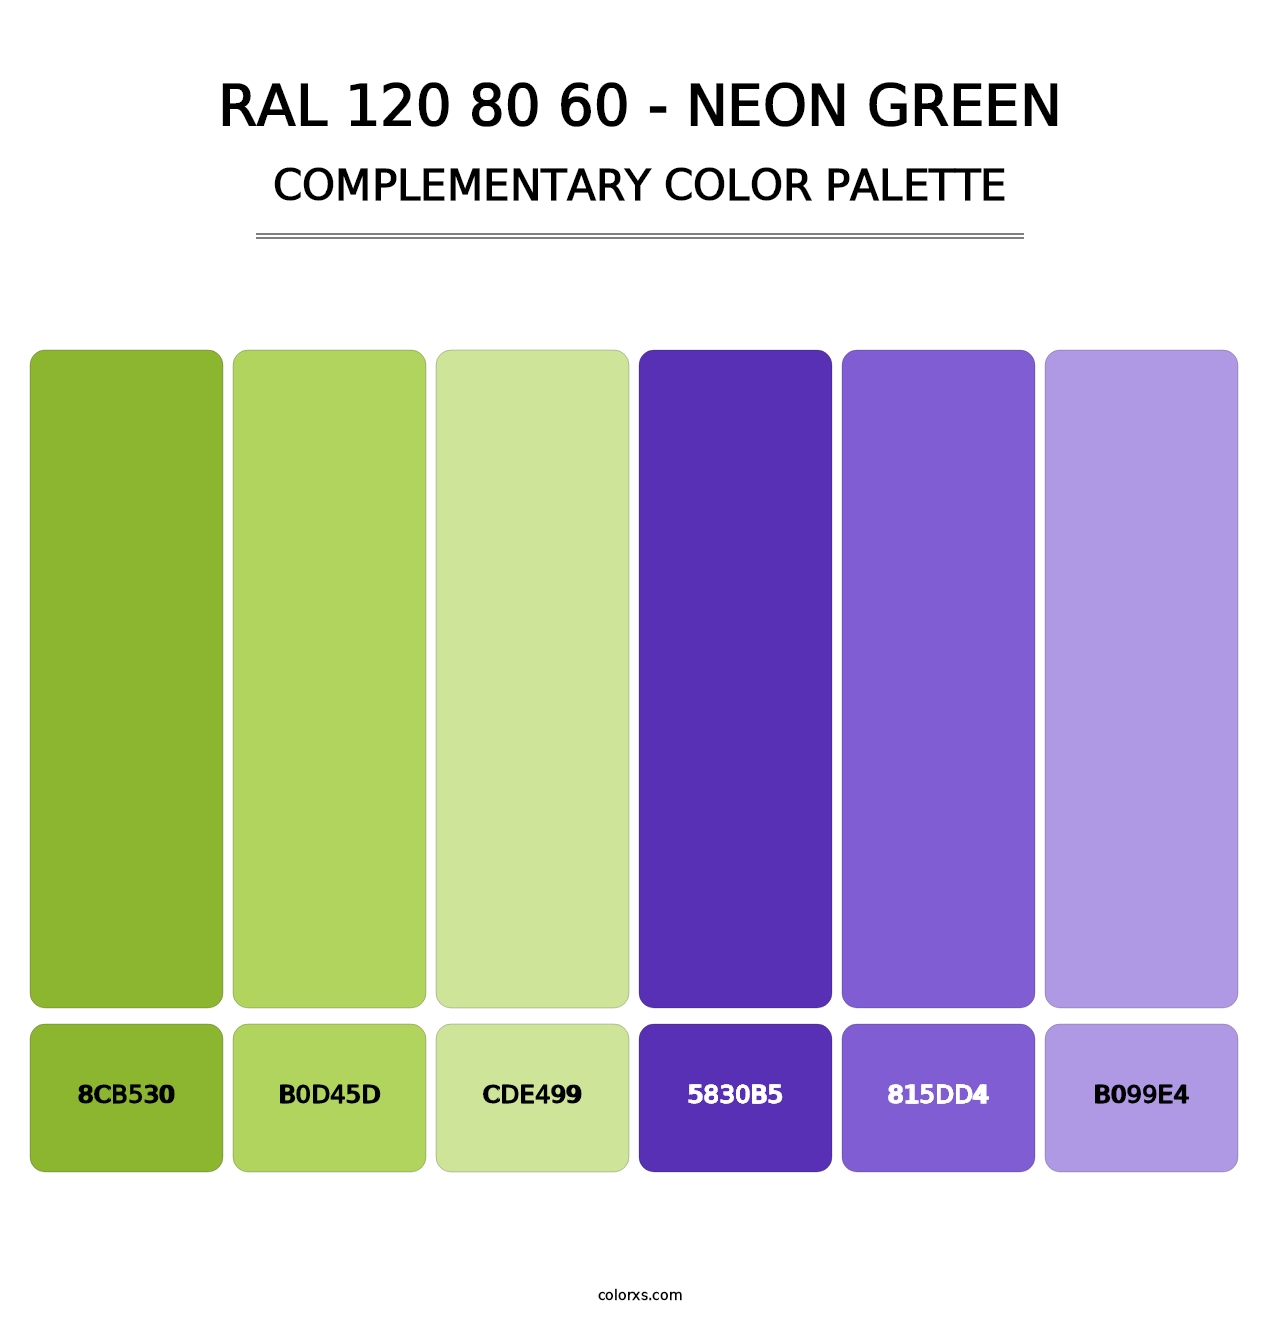 RAL 120 80 60 - Neon Green - Complementary Color Palette